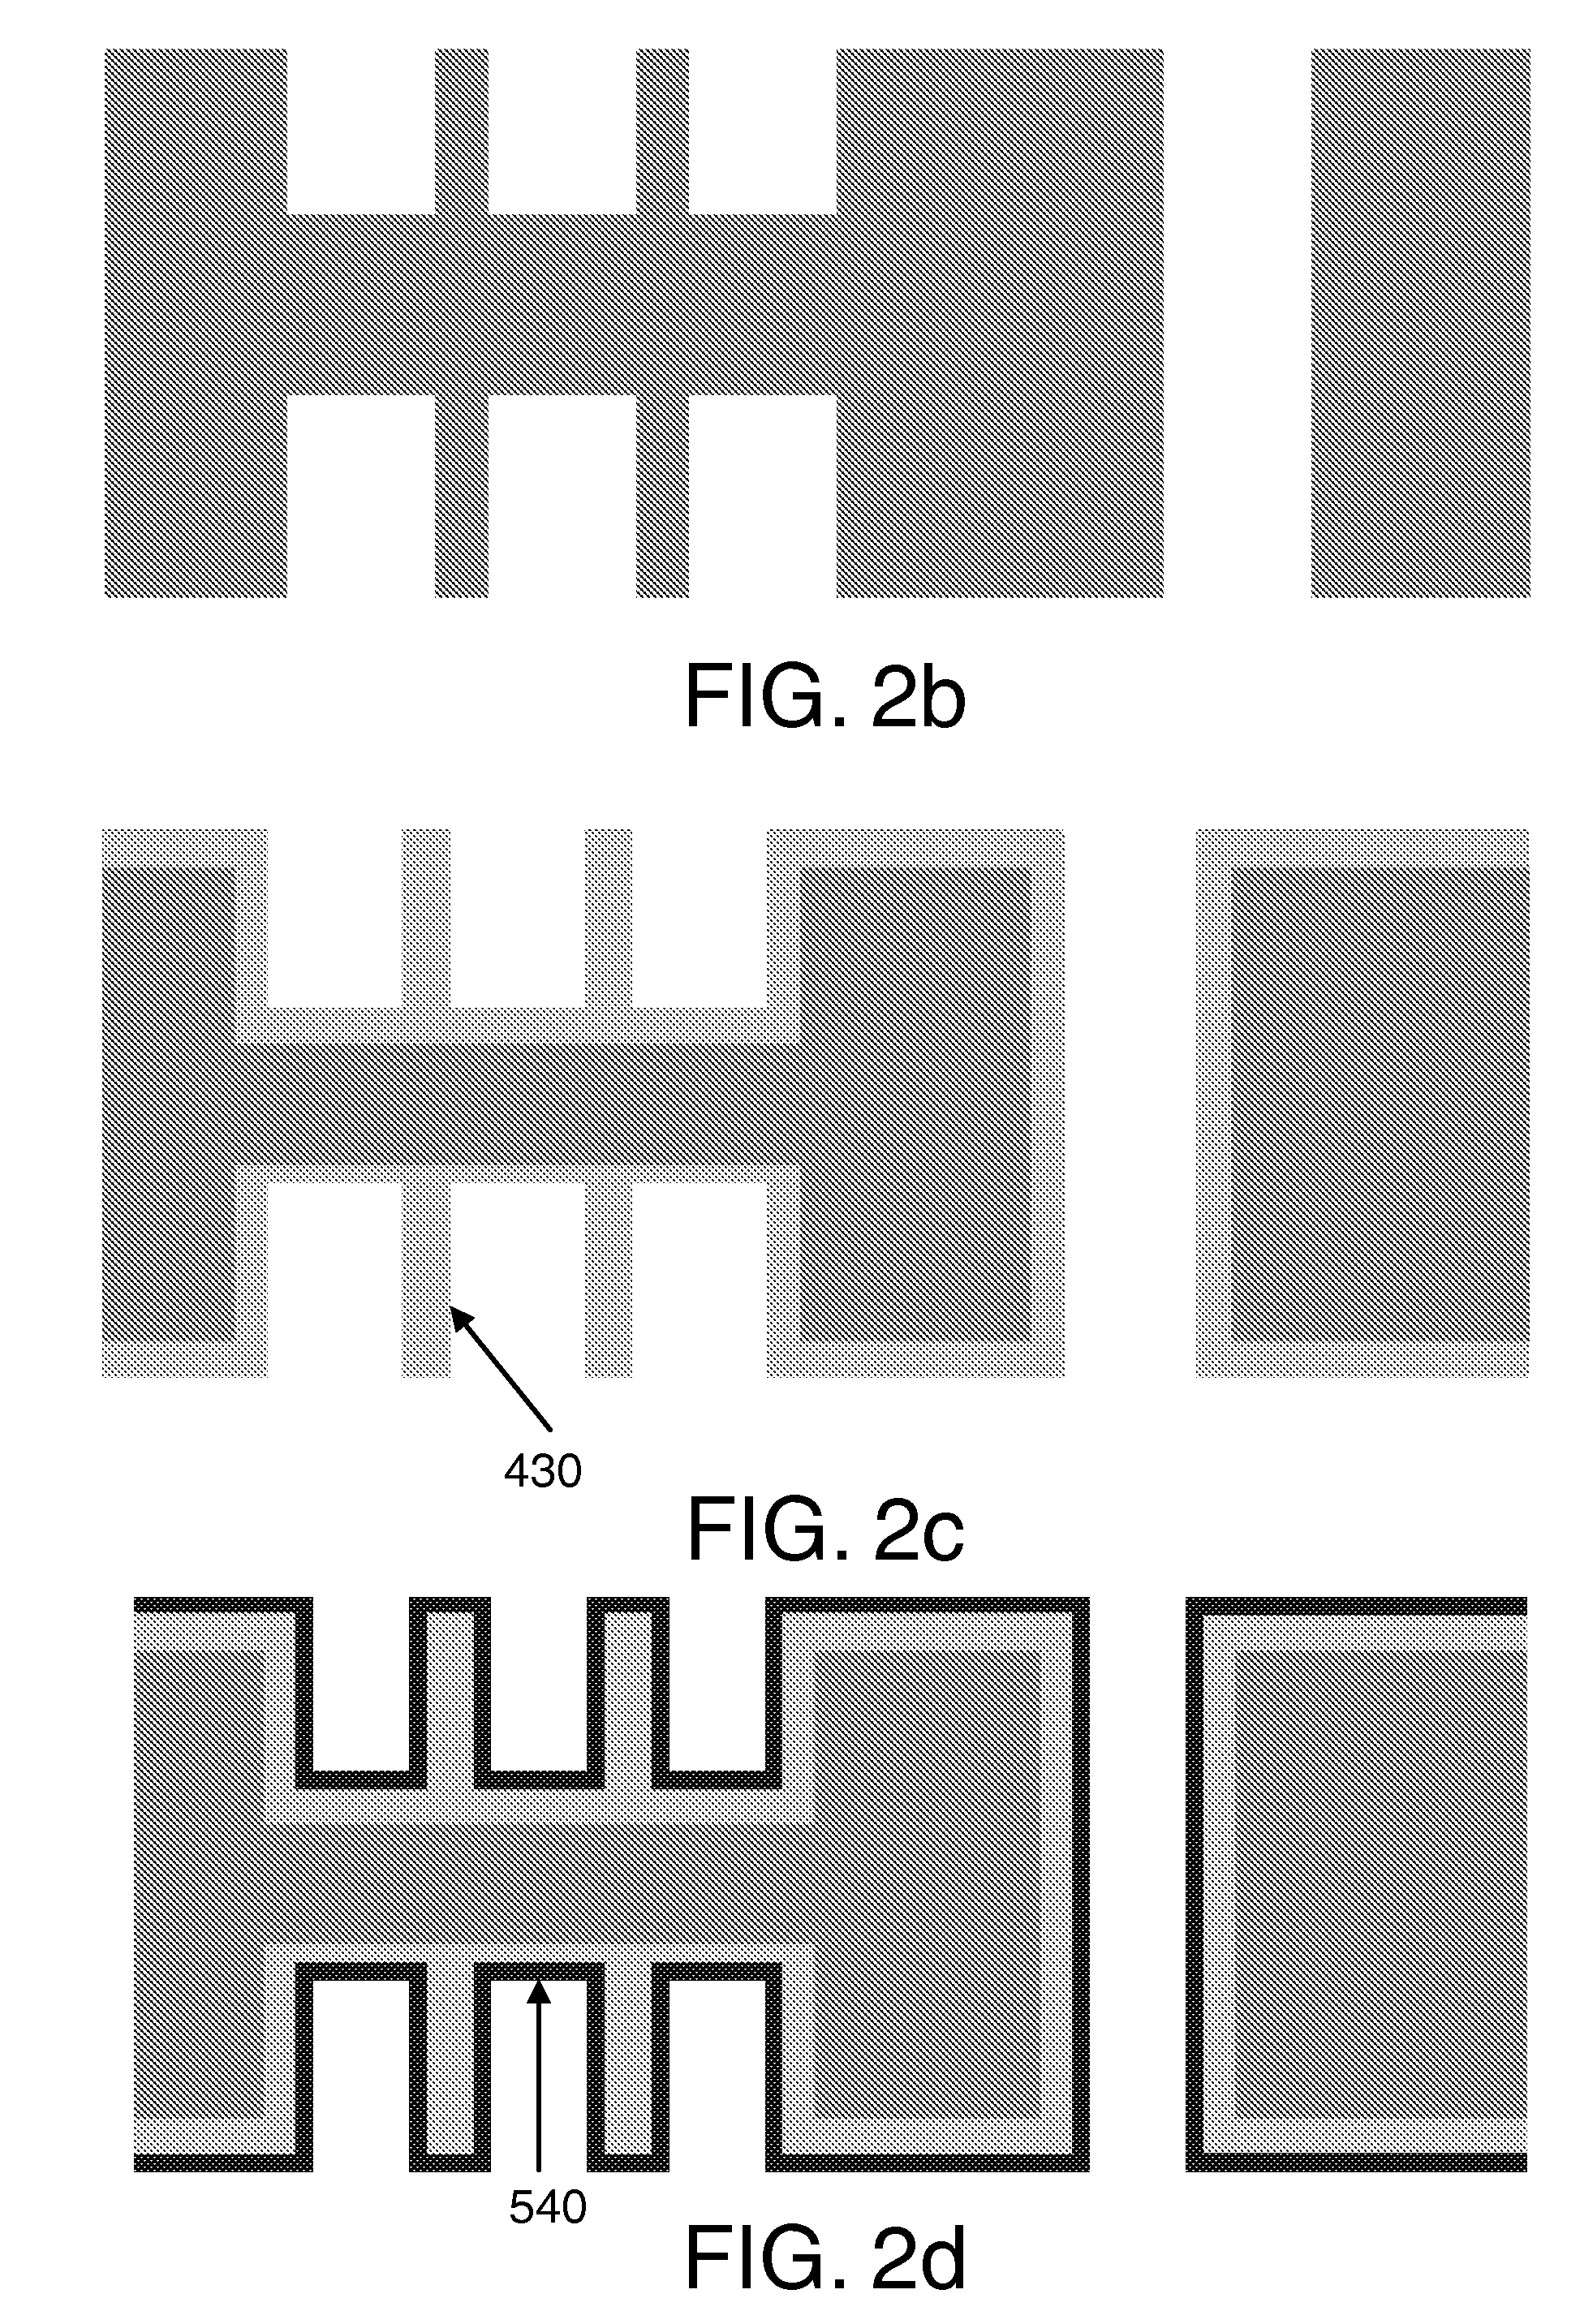 Ultra high density capacity comprising pillar-shaped capacitors formed on both sides of a substrate